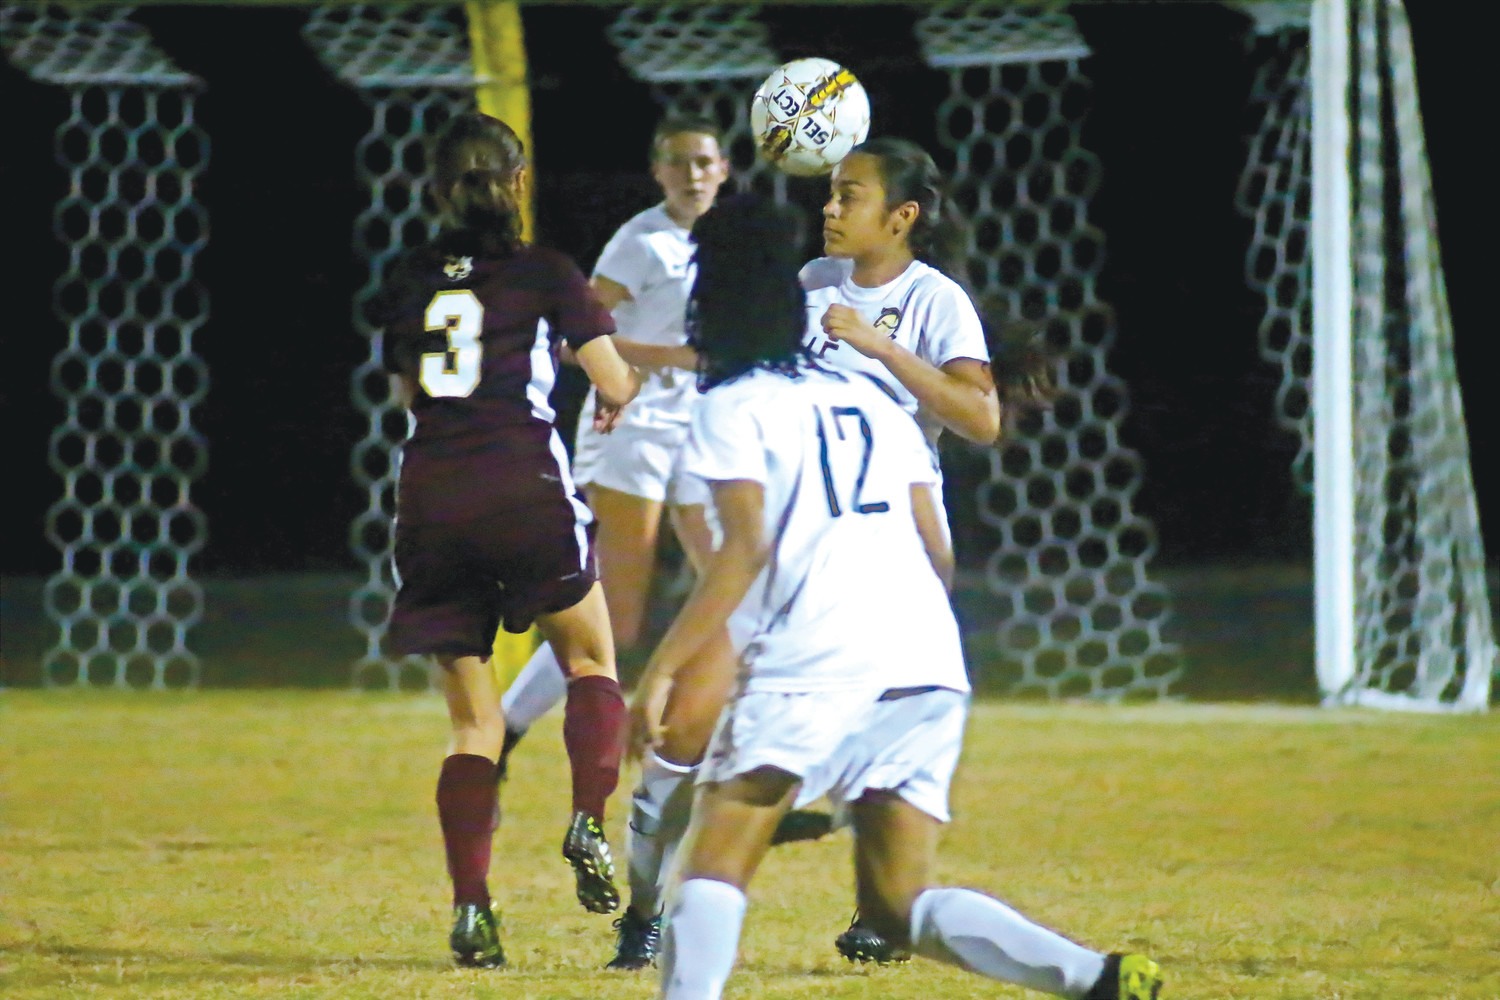 Oakleaf defender Brianna Olazabal gets a head on loose ball in front of Knights’ net.